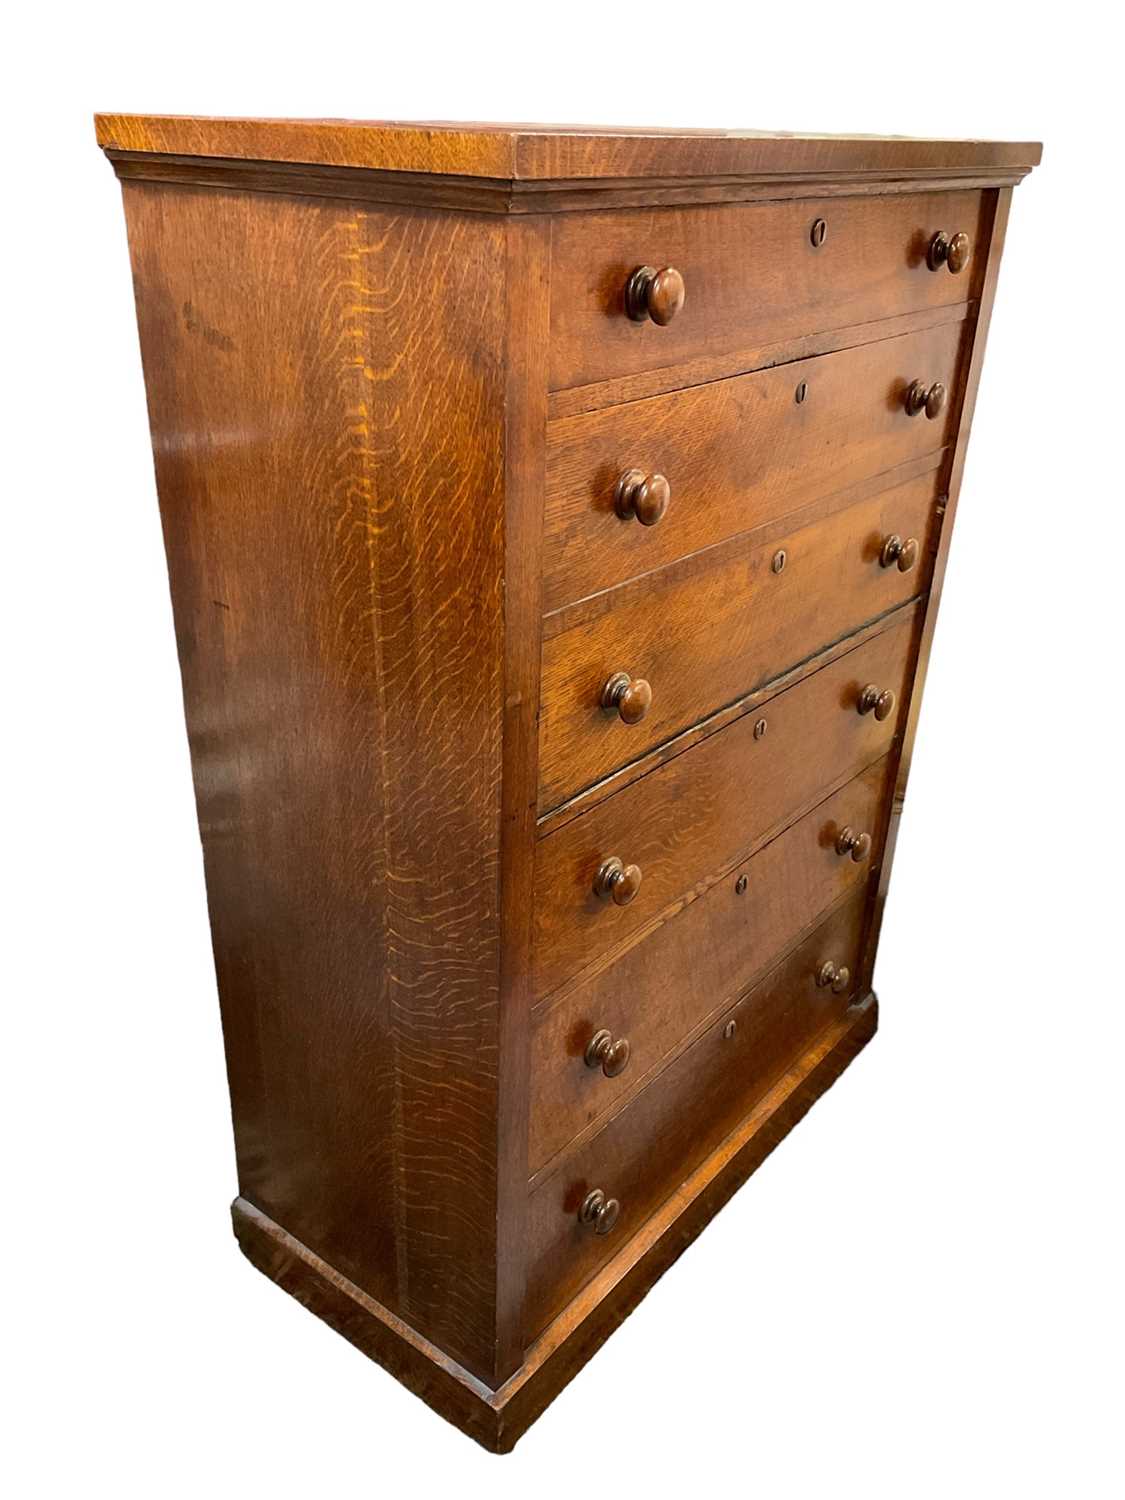 Early 19th century brown oak narrow secretaire chest